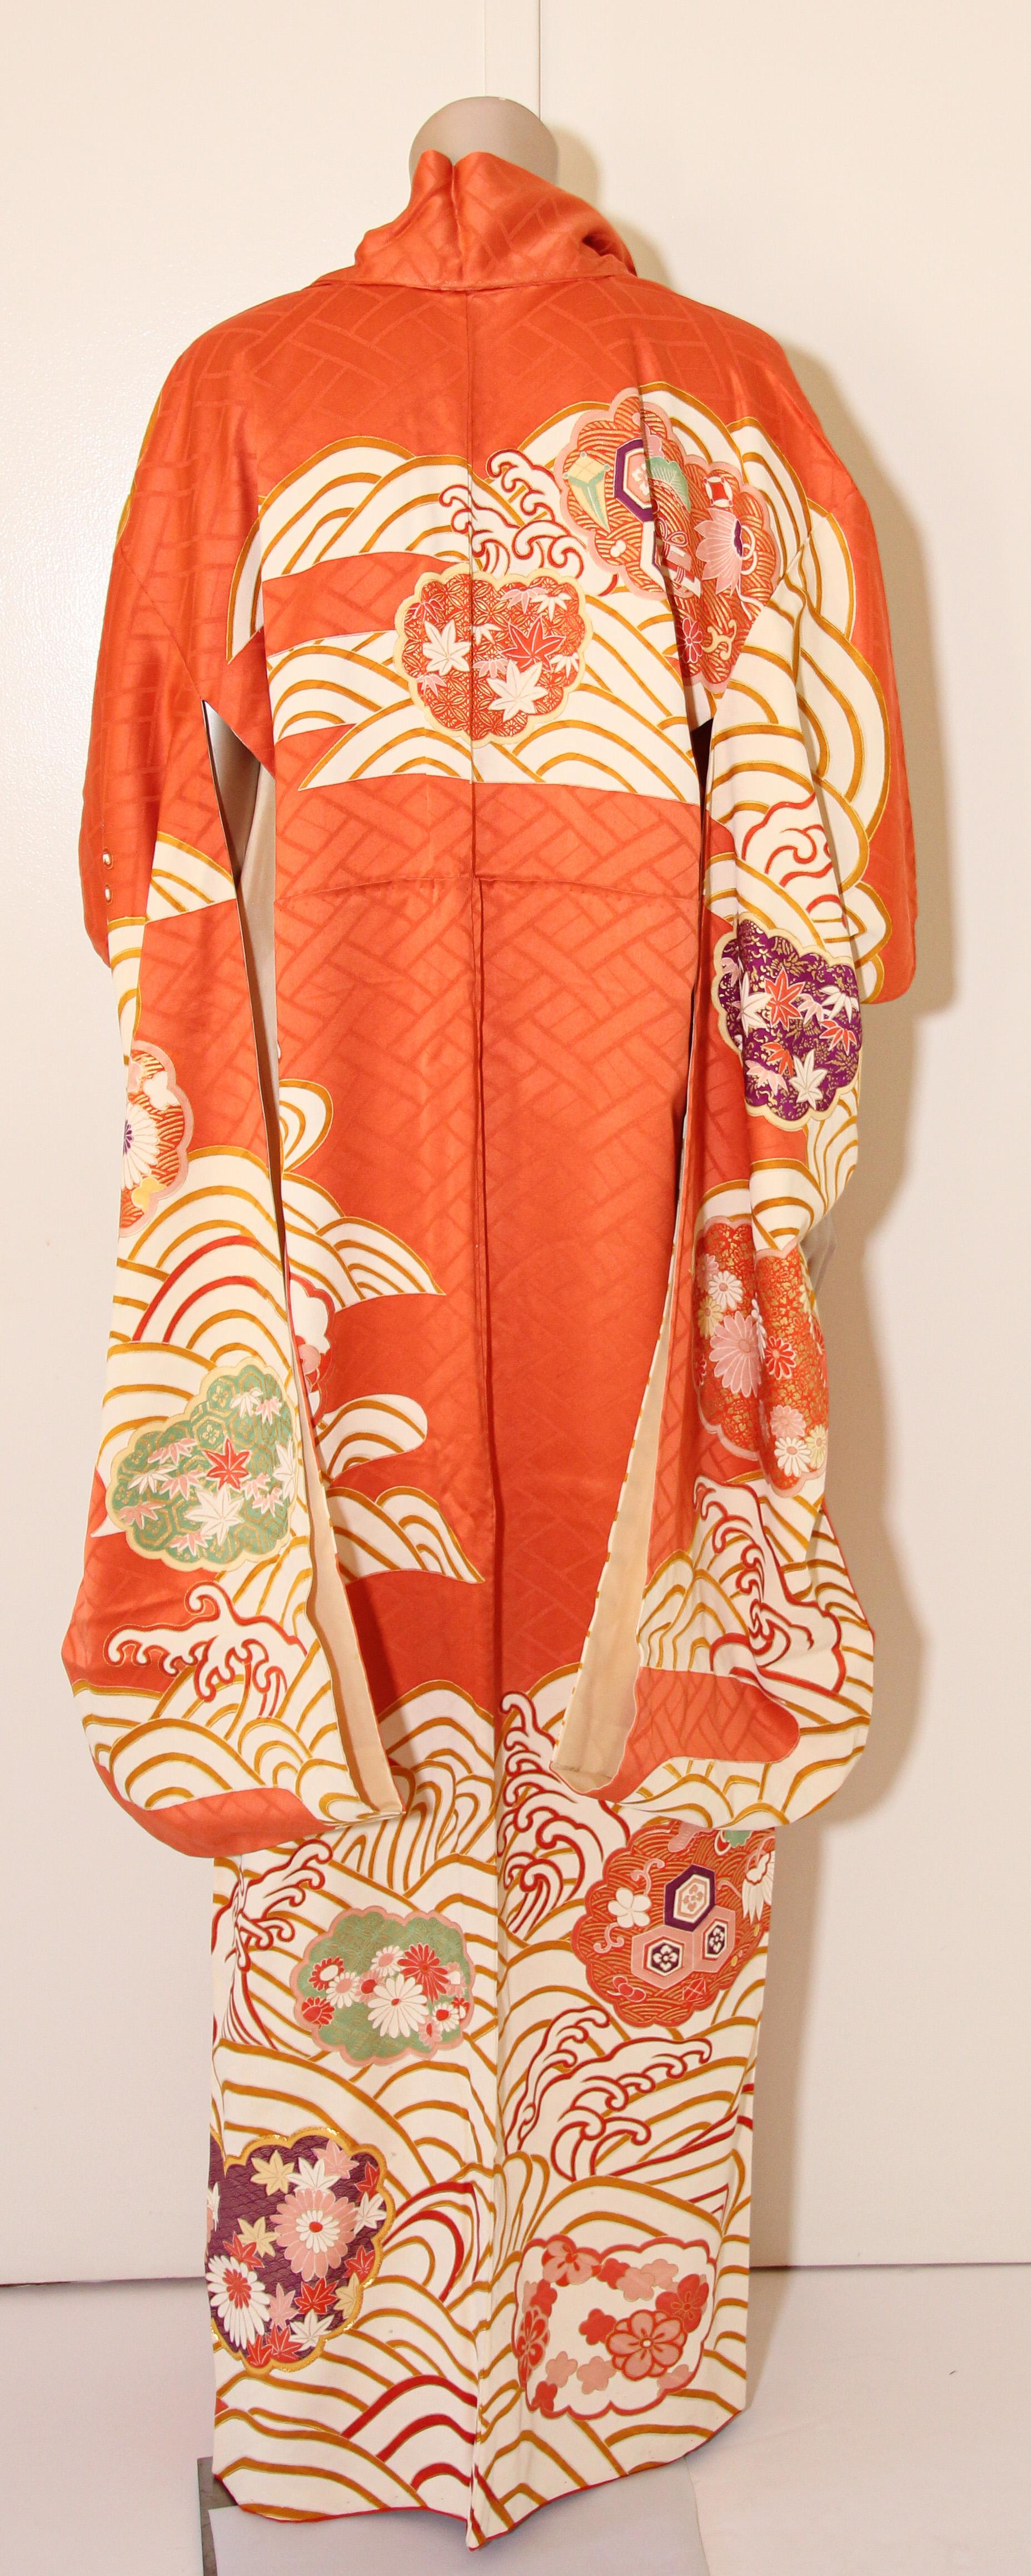 Fine vintage Japanese silk kimono.
A fine Japanese kimono, circa 1970s.
A wonderful textile for collectors.
A silk Japanese furisode kimono with fine decoration.
The furisode was made with a light orange color silk.
Hand painted and hand-sewn